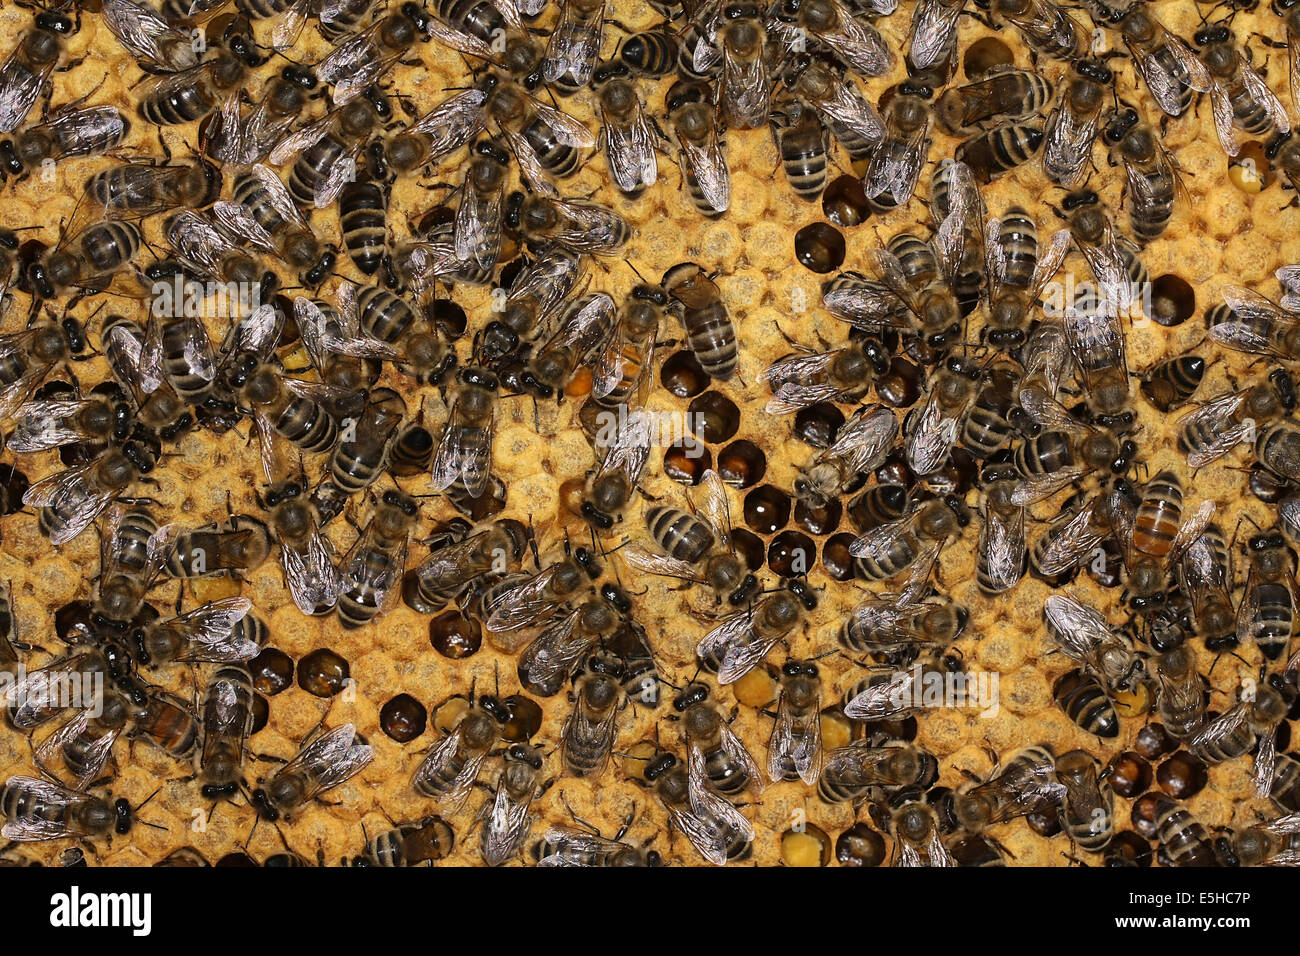 Bees on a brood comb with capped cells of the worker bees. Nine days after oviposition the brood cells are capped. The development from egg to the ready bee needs 21 days. Photo: Klaus Nowottnick Date: June 04, 2010 Stock Photo